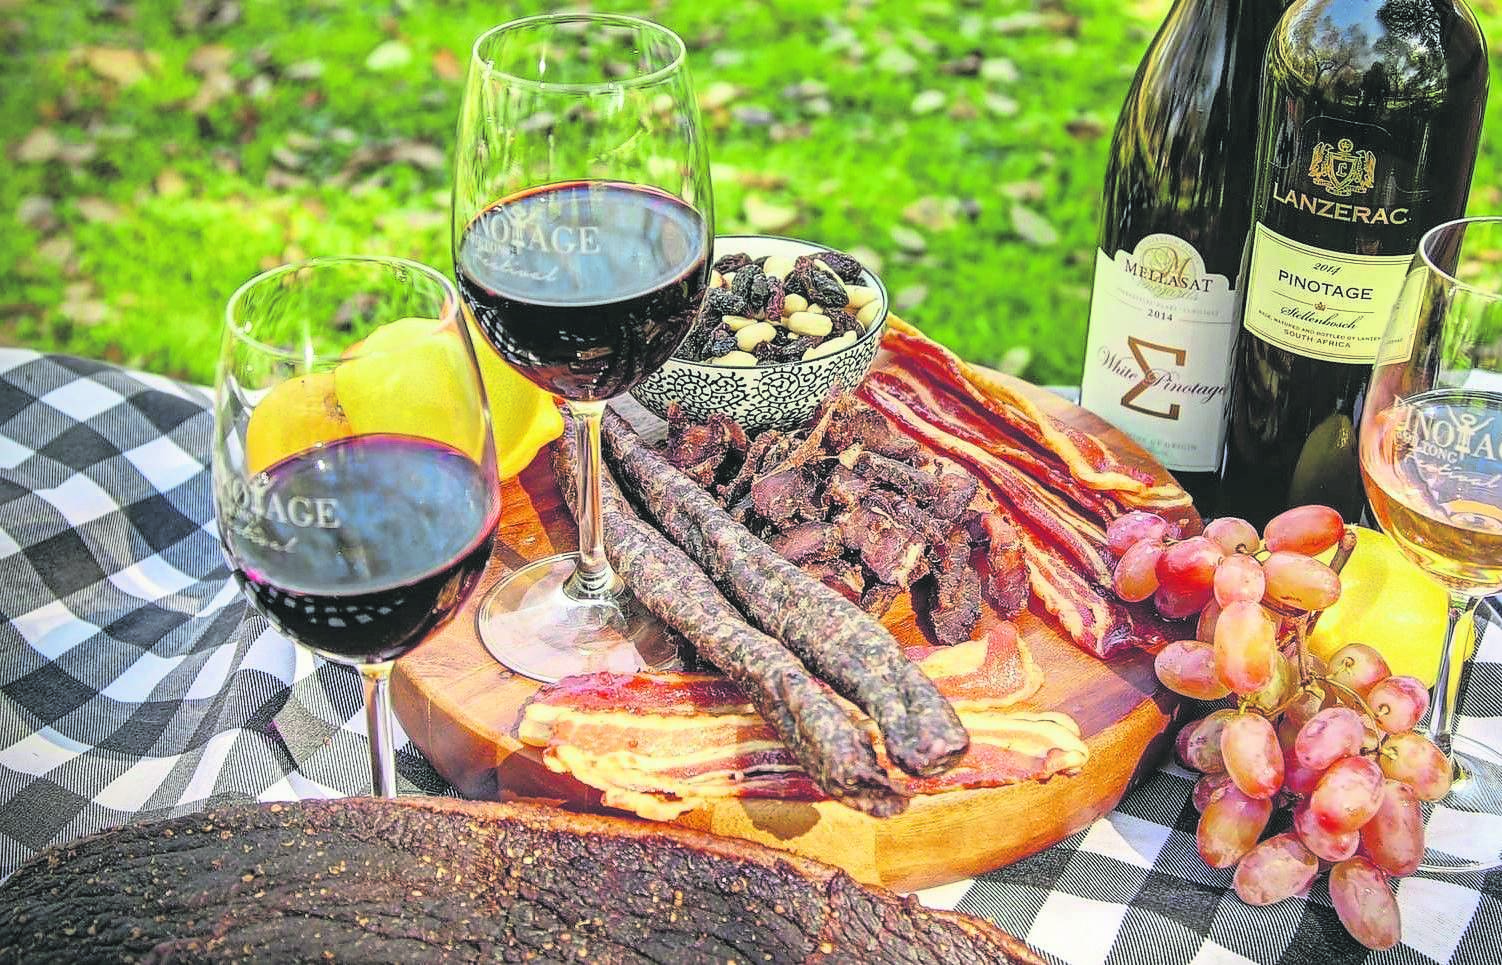 Get your tickets now for the Pinotage & Biltong Festival at Rhebokskloof.Photo: Supplied